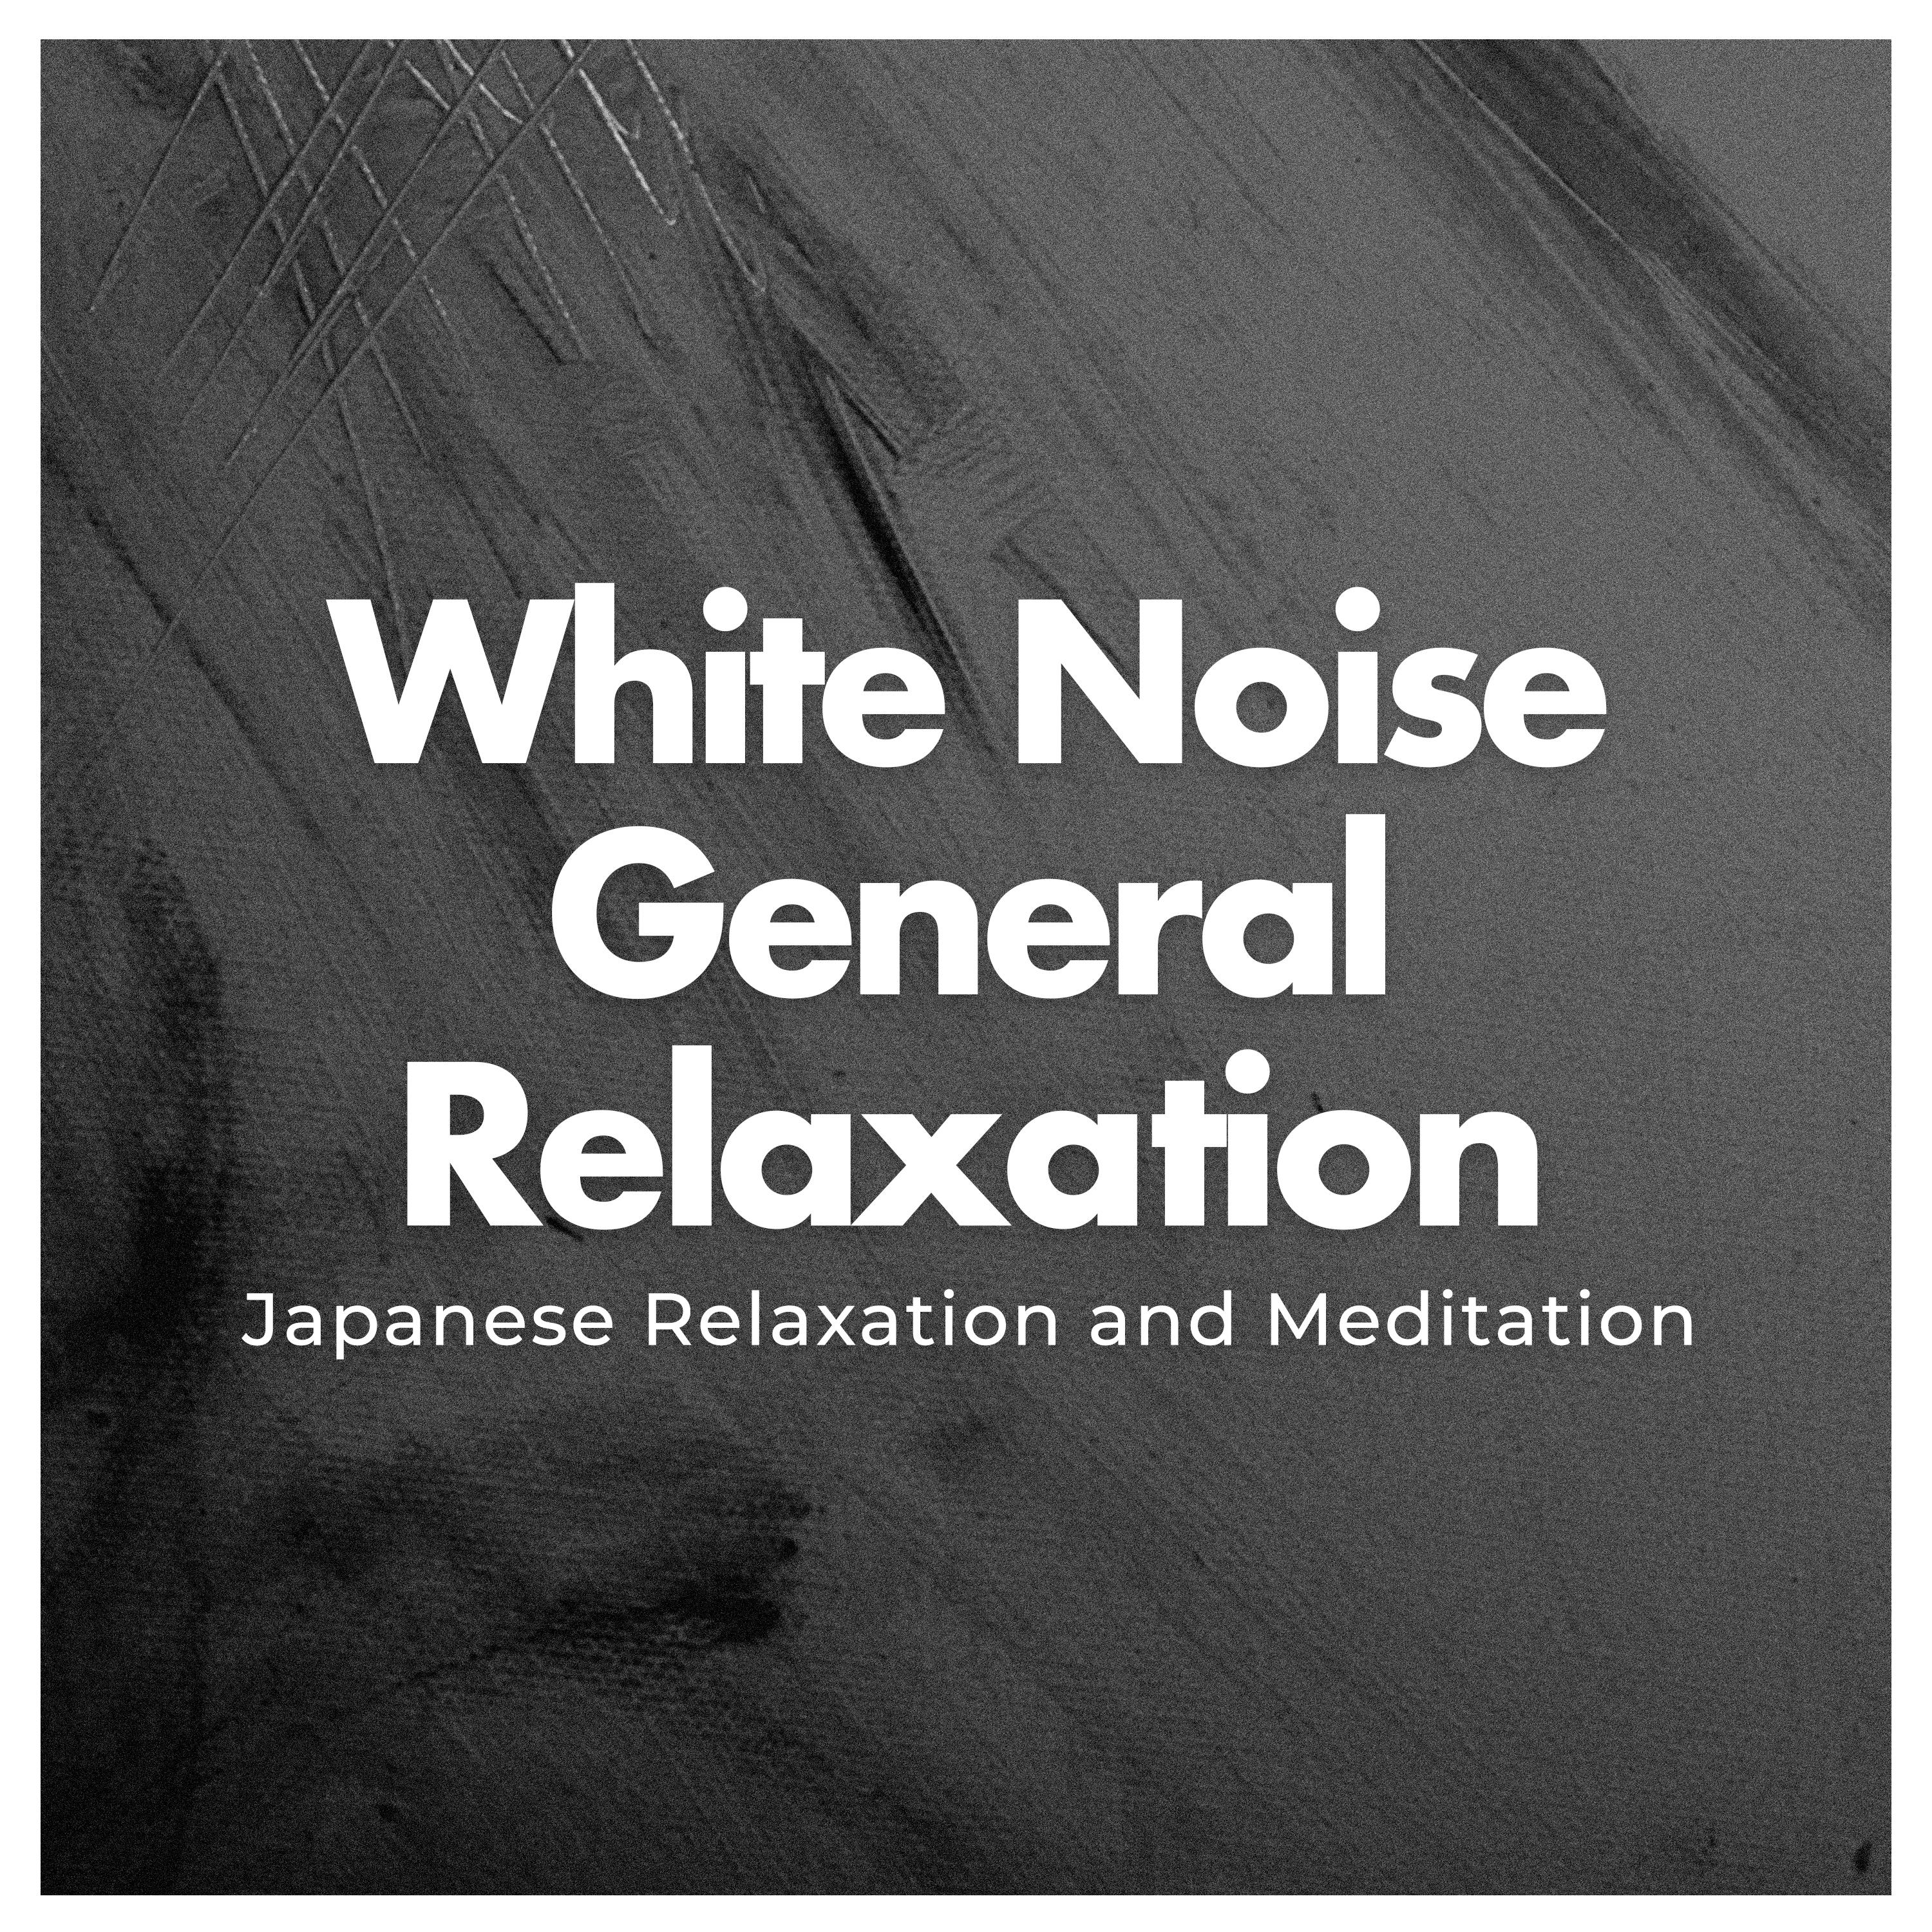 White Noise General Relaxation